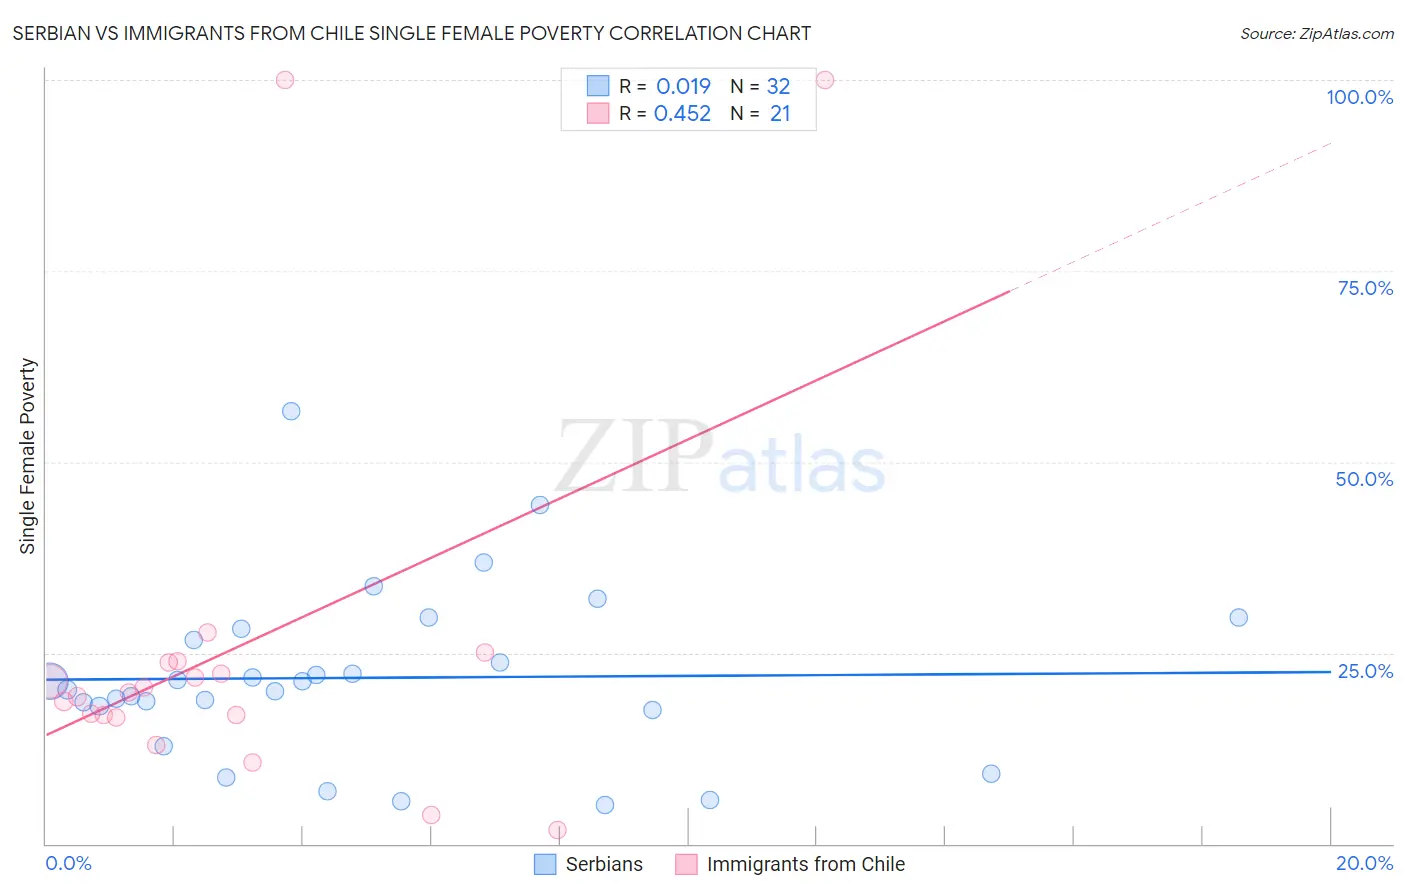 Serbian vs Immigrants from Chile Single Female Poverty